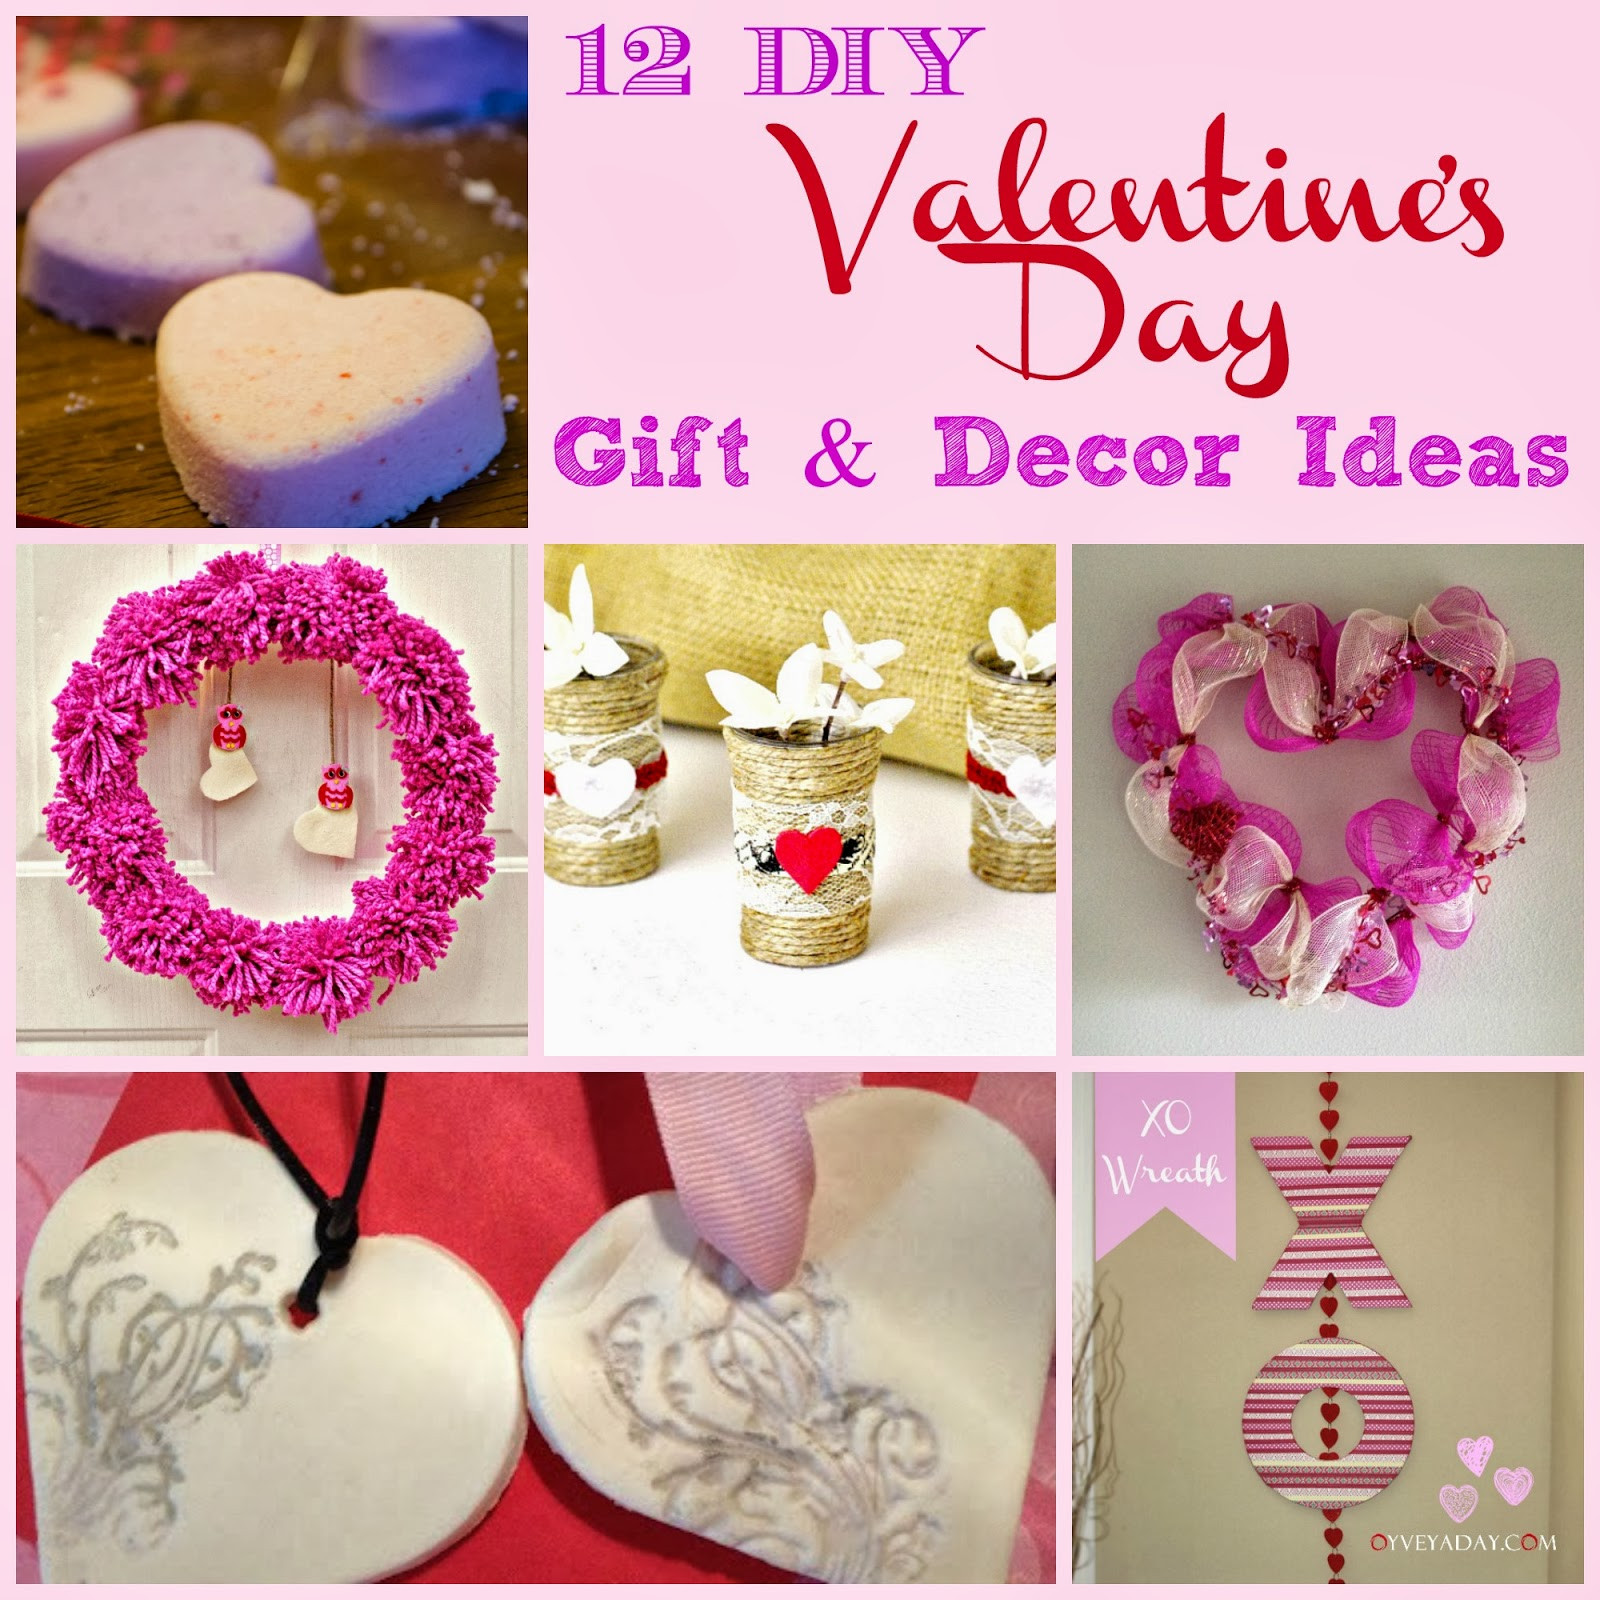 Valentines Gift DIY
 12 DIY Valentine s Day Gift & Decor Ideas Outnumbered 3 to 1